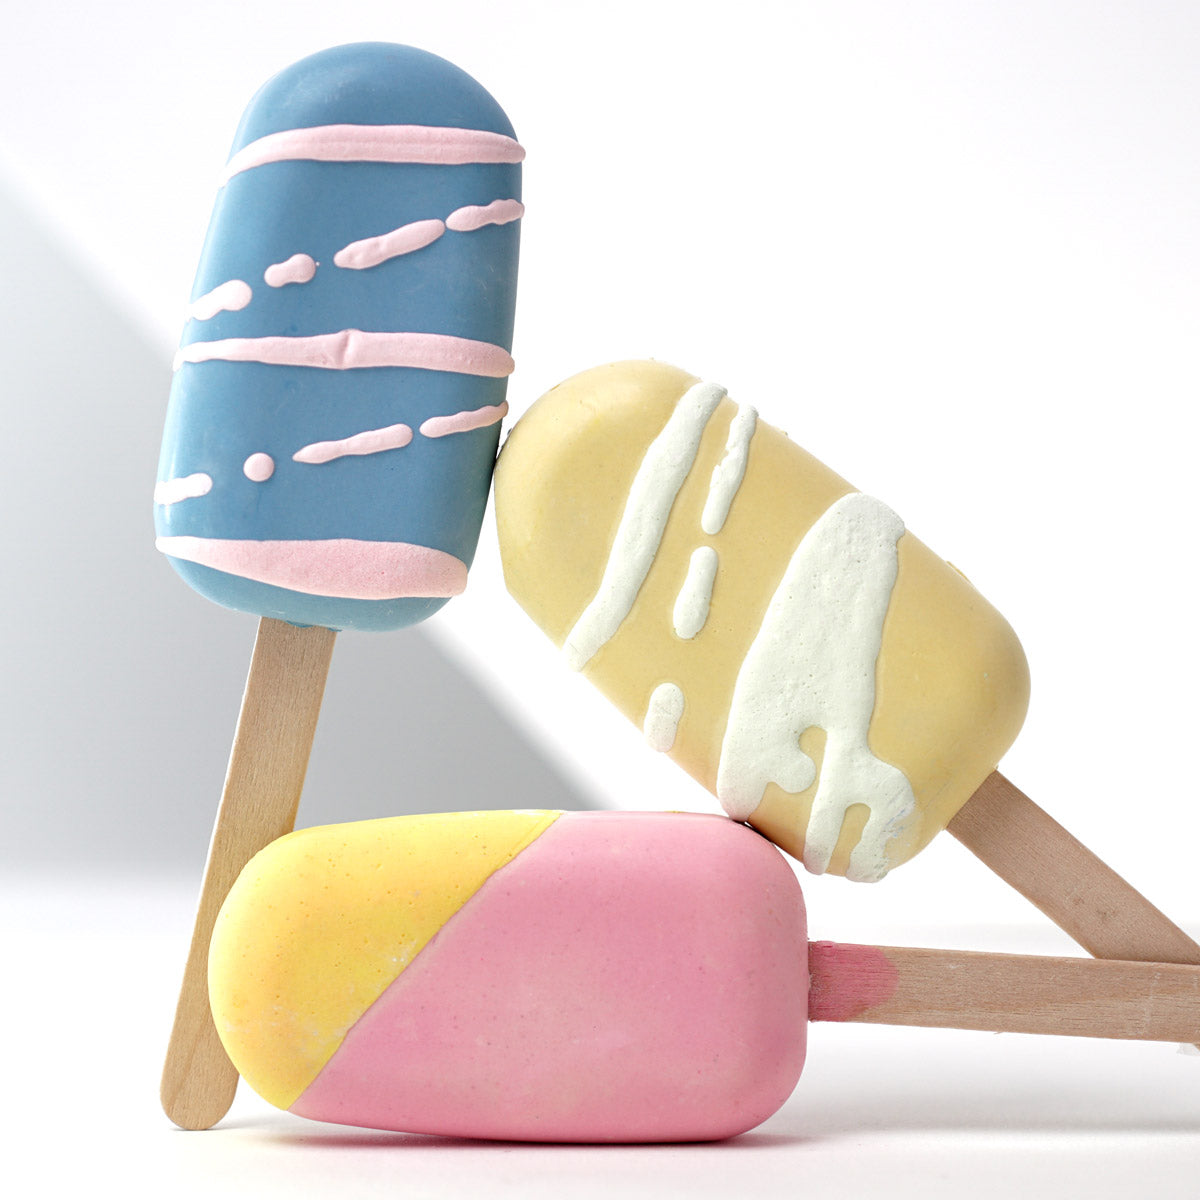 Stay Cool Popsicle Set -  &#39;Restoring vision across the globe&#39;